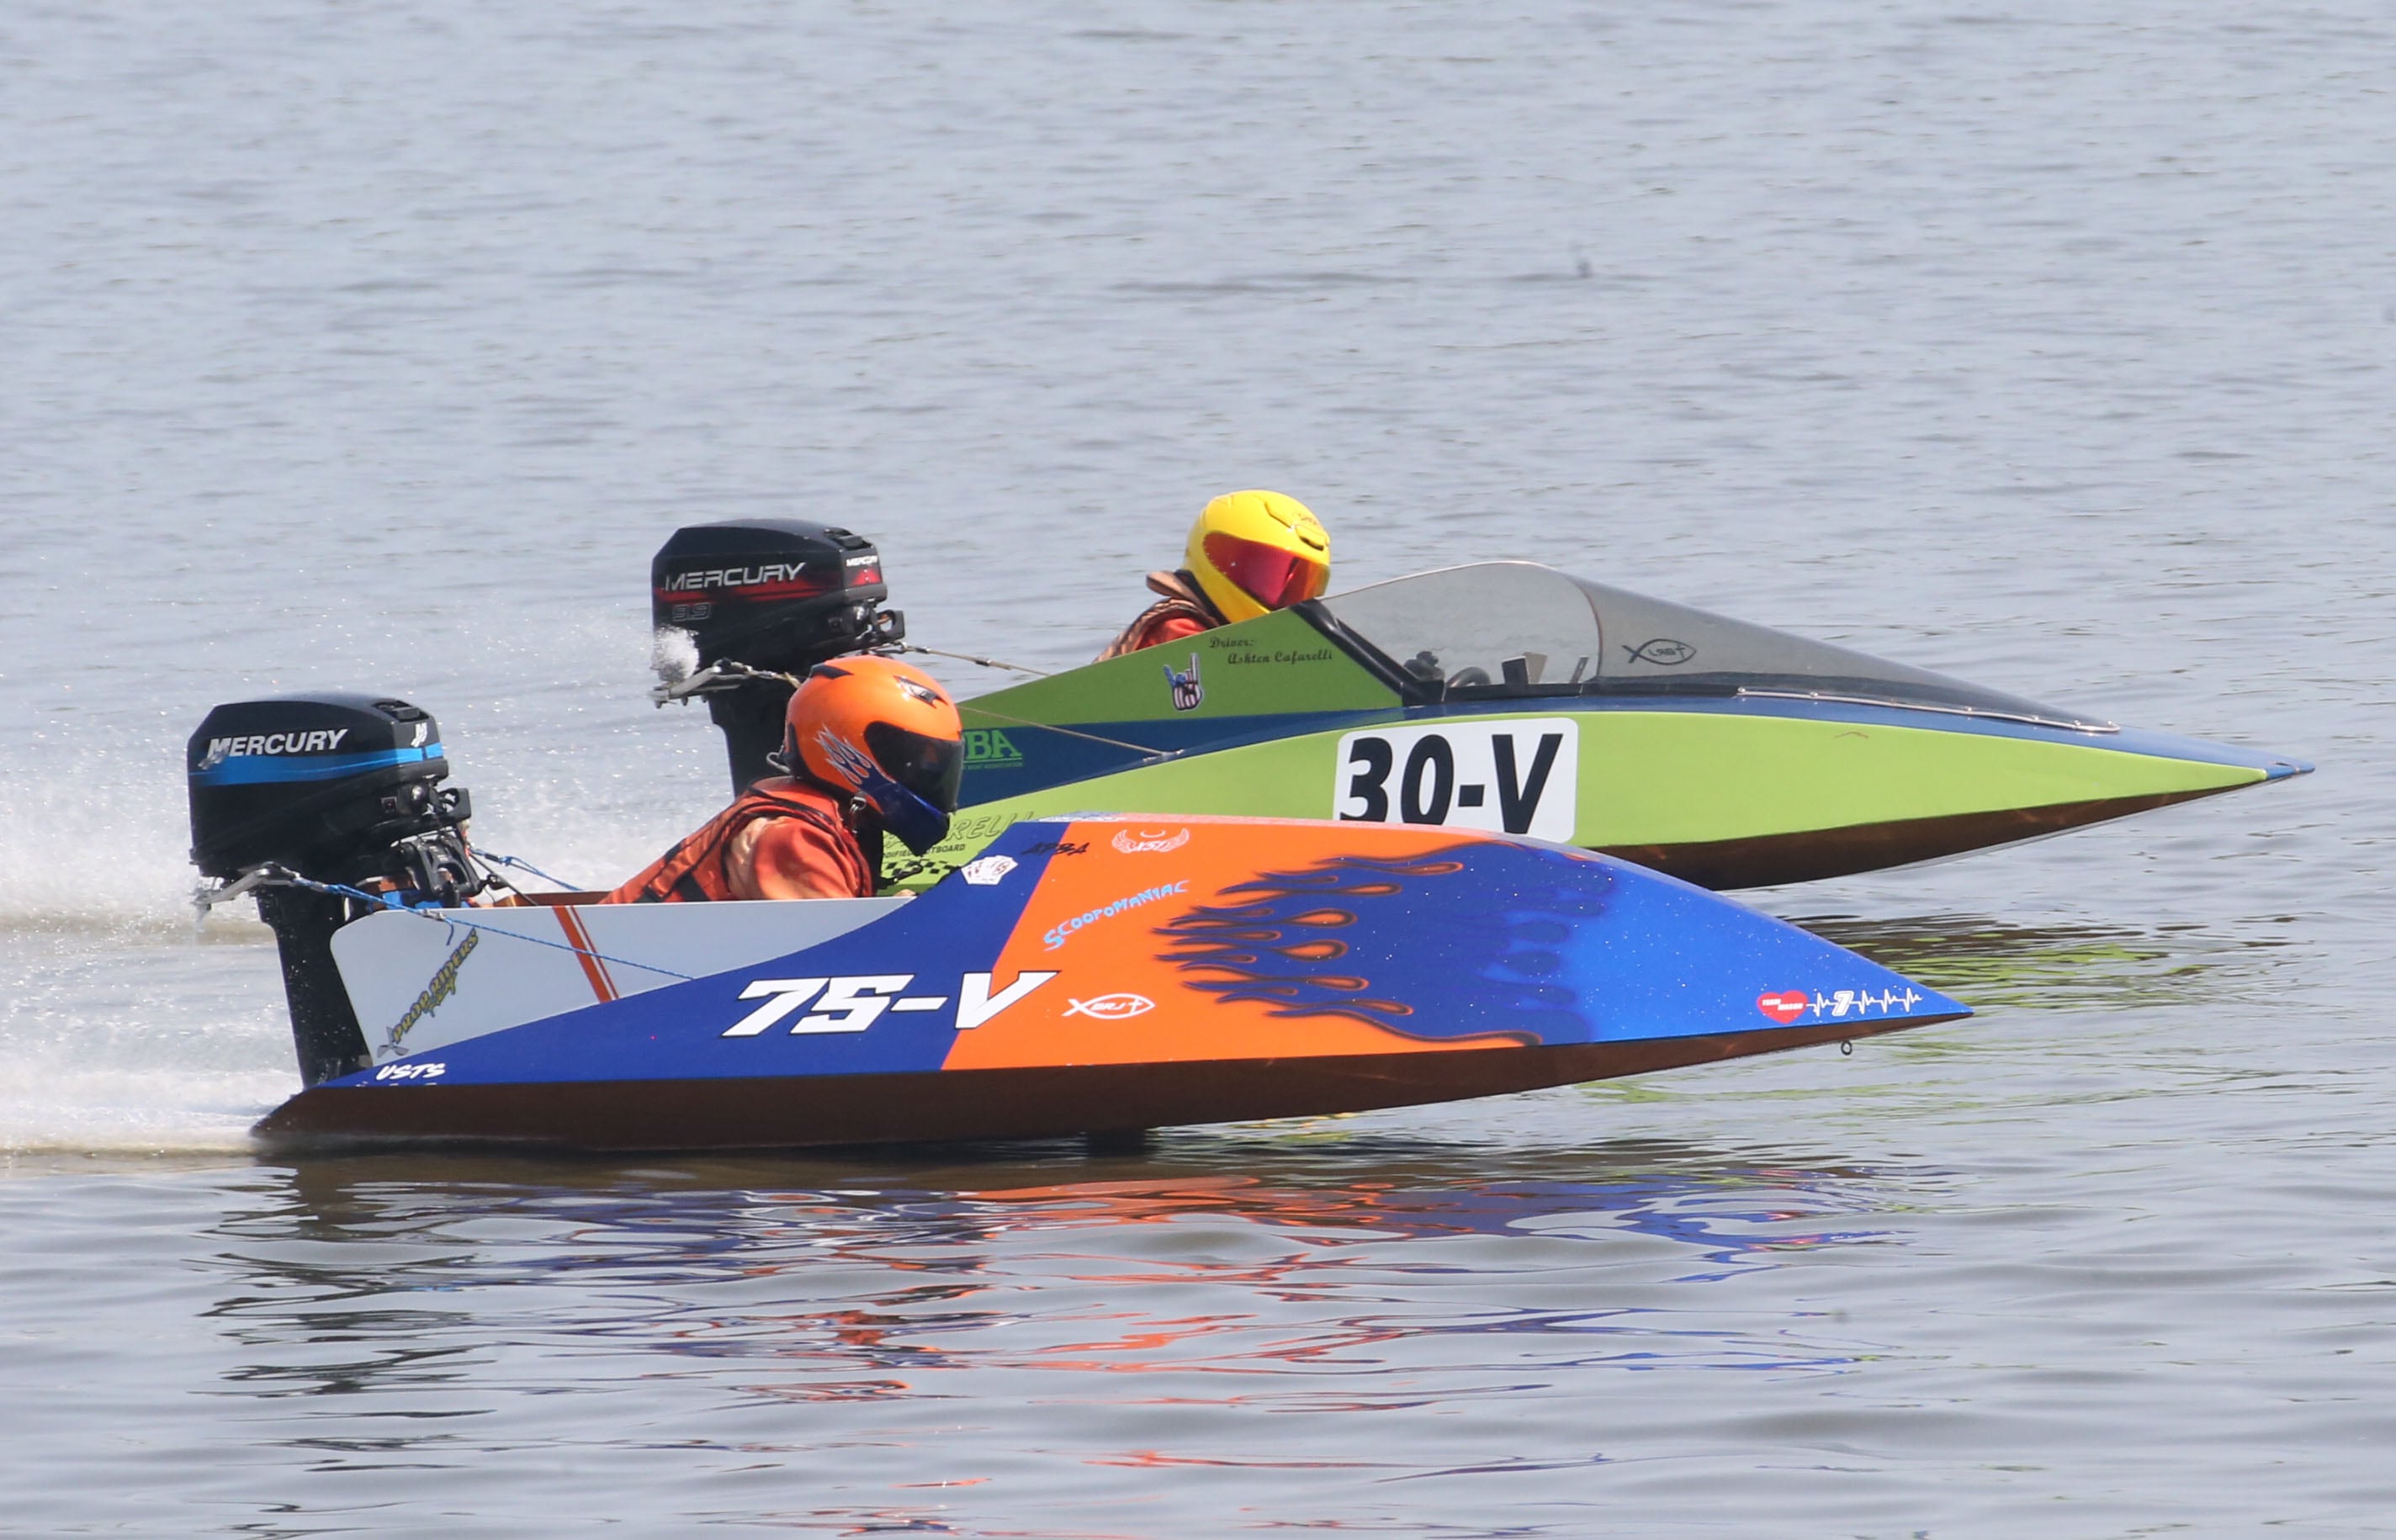 Boat racing: Cousins Rayce Bosnich, Ethan Fox win first titles on Lake DePue